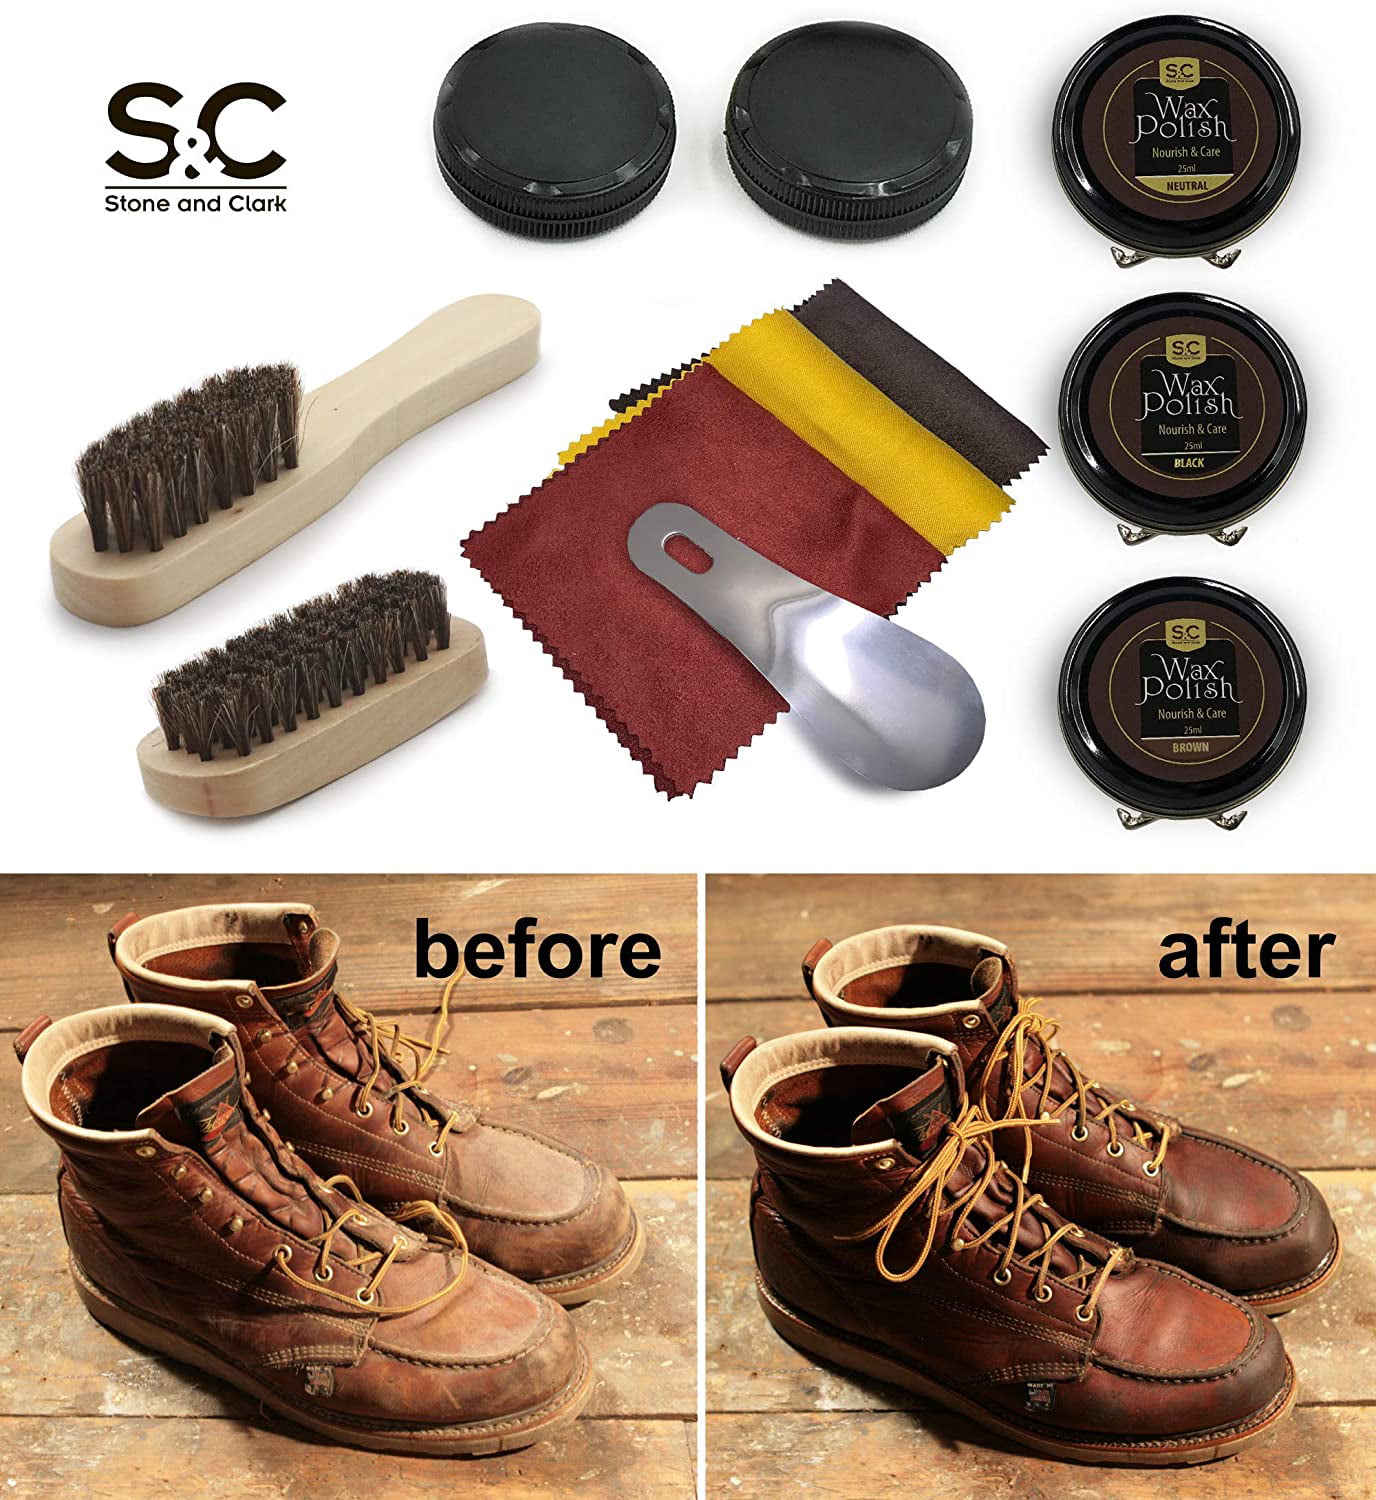 Compact Shoe Cleaning Kit with Horse Hair Brushes 12PC Shoe Polish & Care Kit Leather Shoe Shine Kit with Brown Wax 